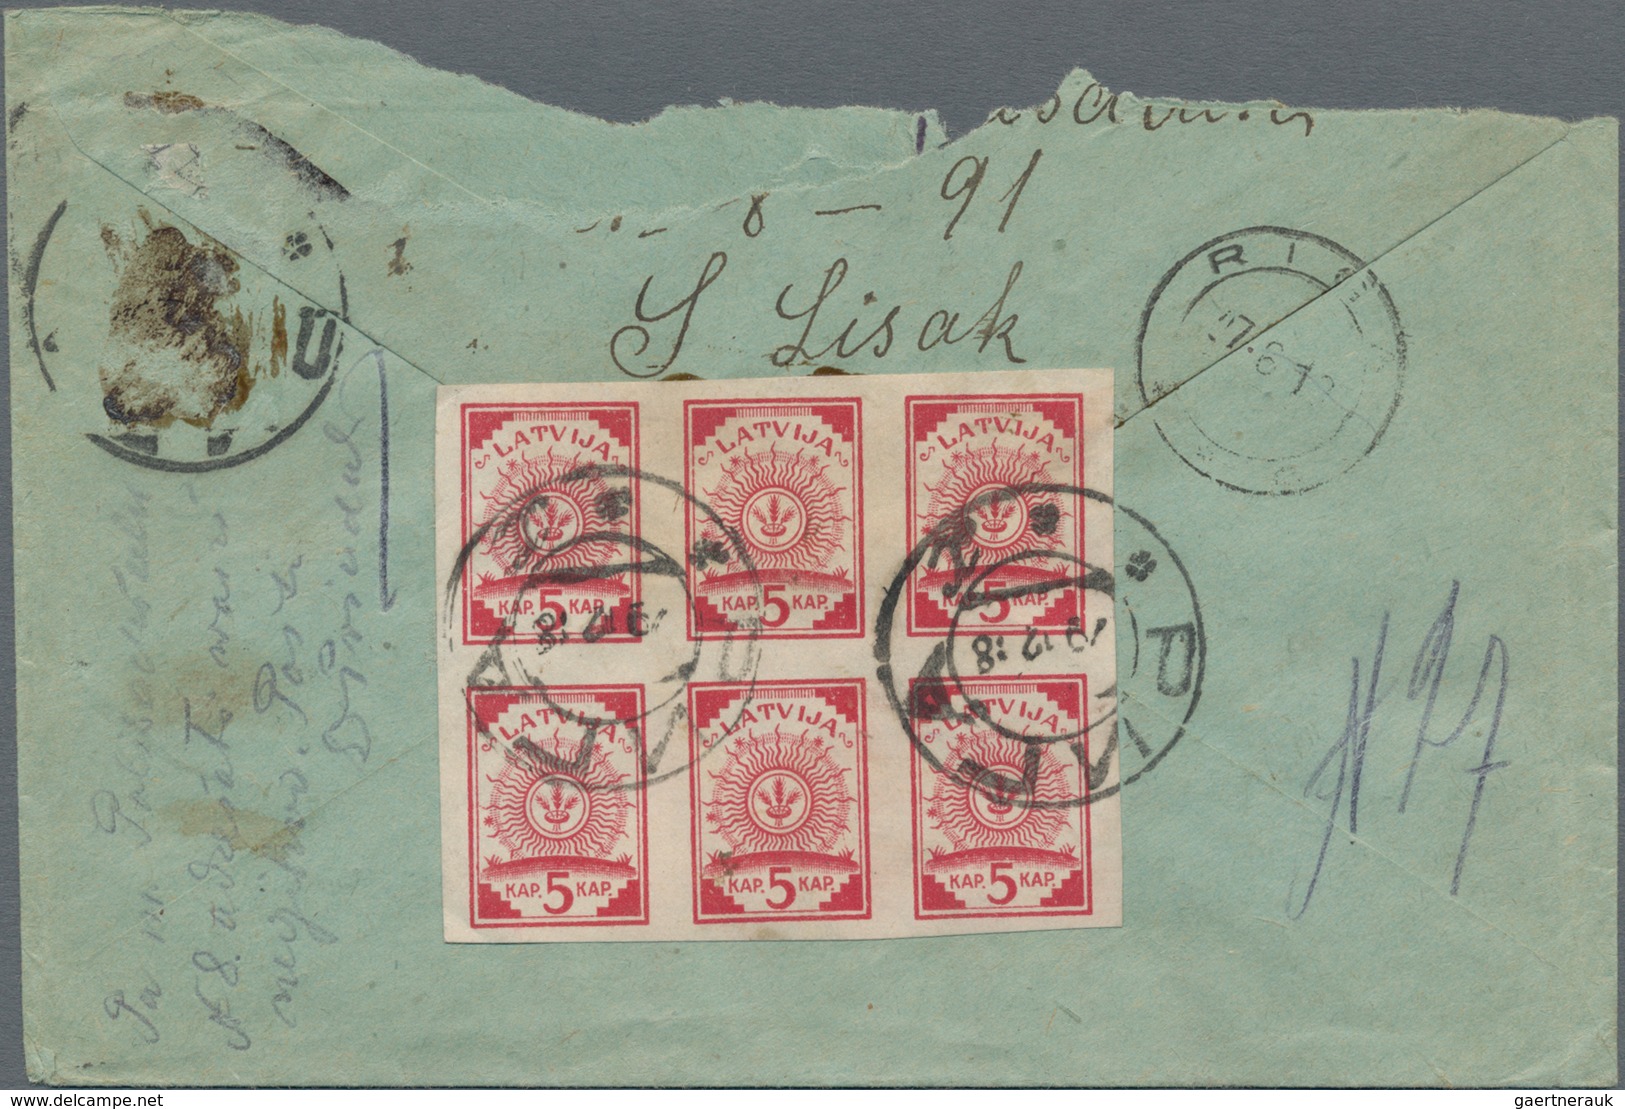 Lettland: 1918/1919, Registered Letter From " RIGA 19 12 18" With Cyrillic Postmark 29/12/18 Held In - Letland